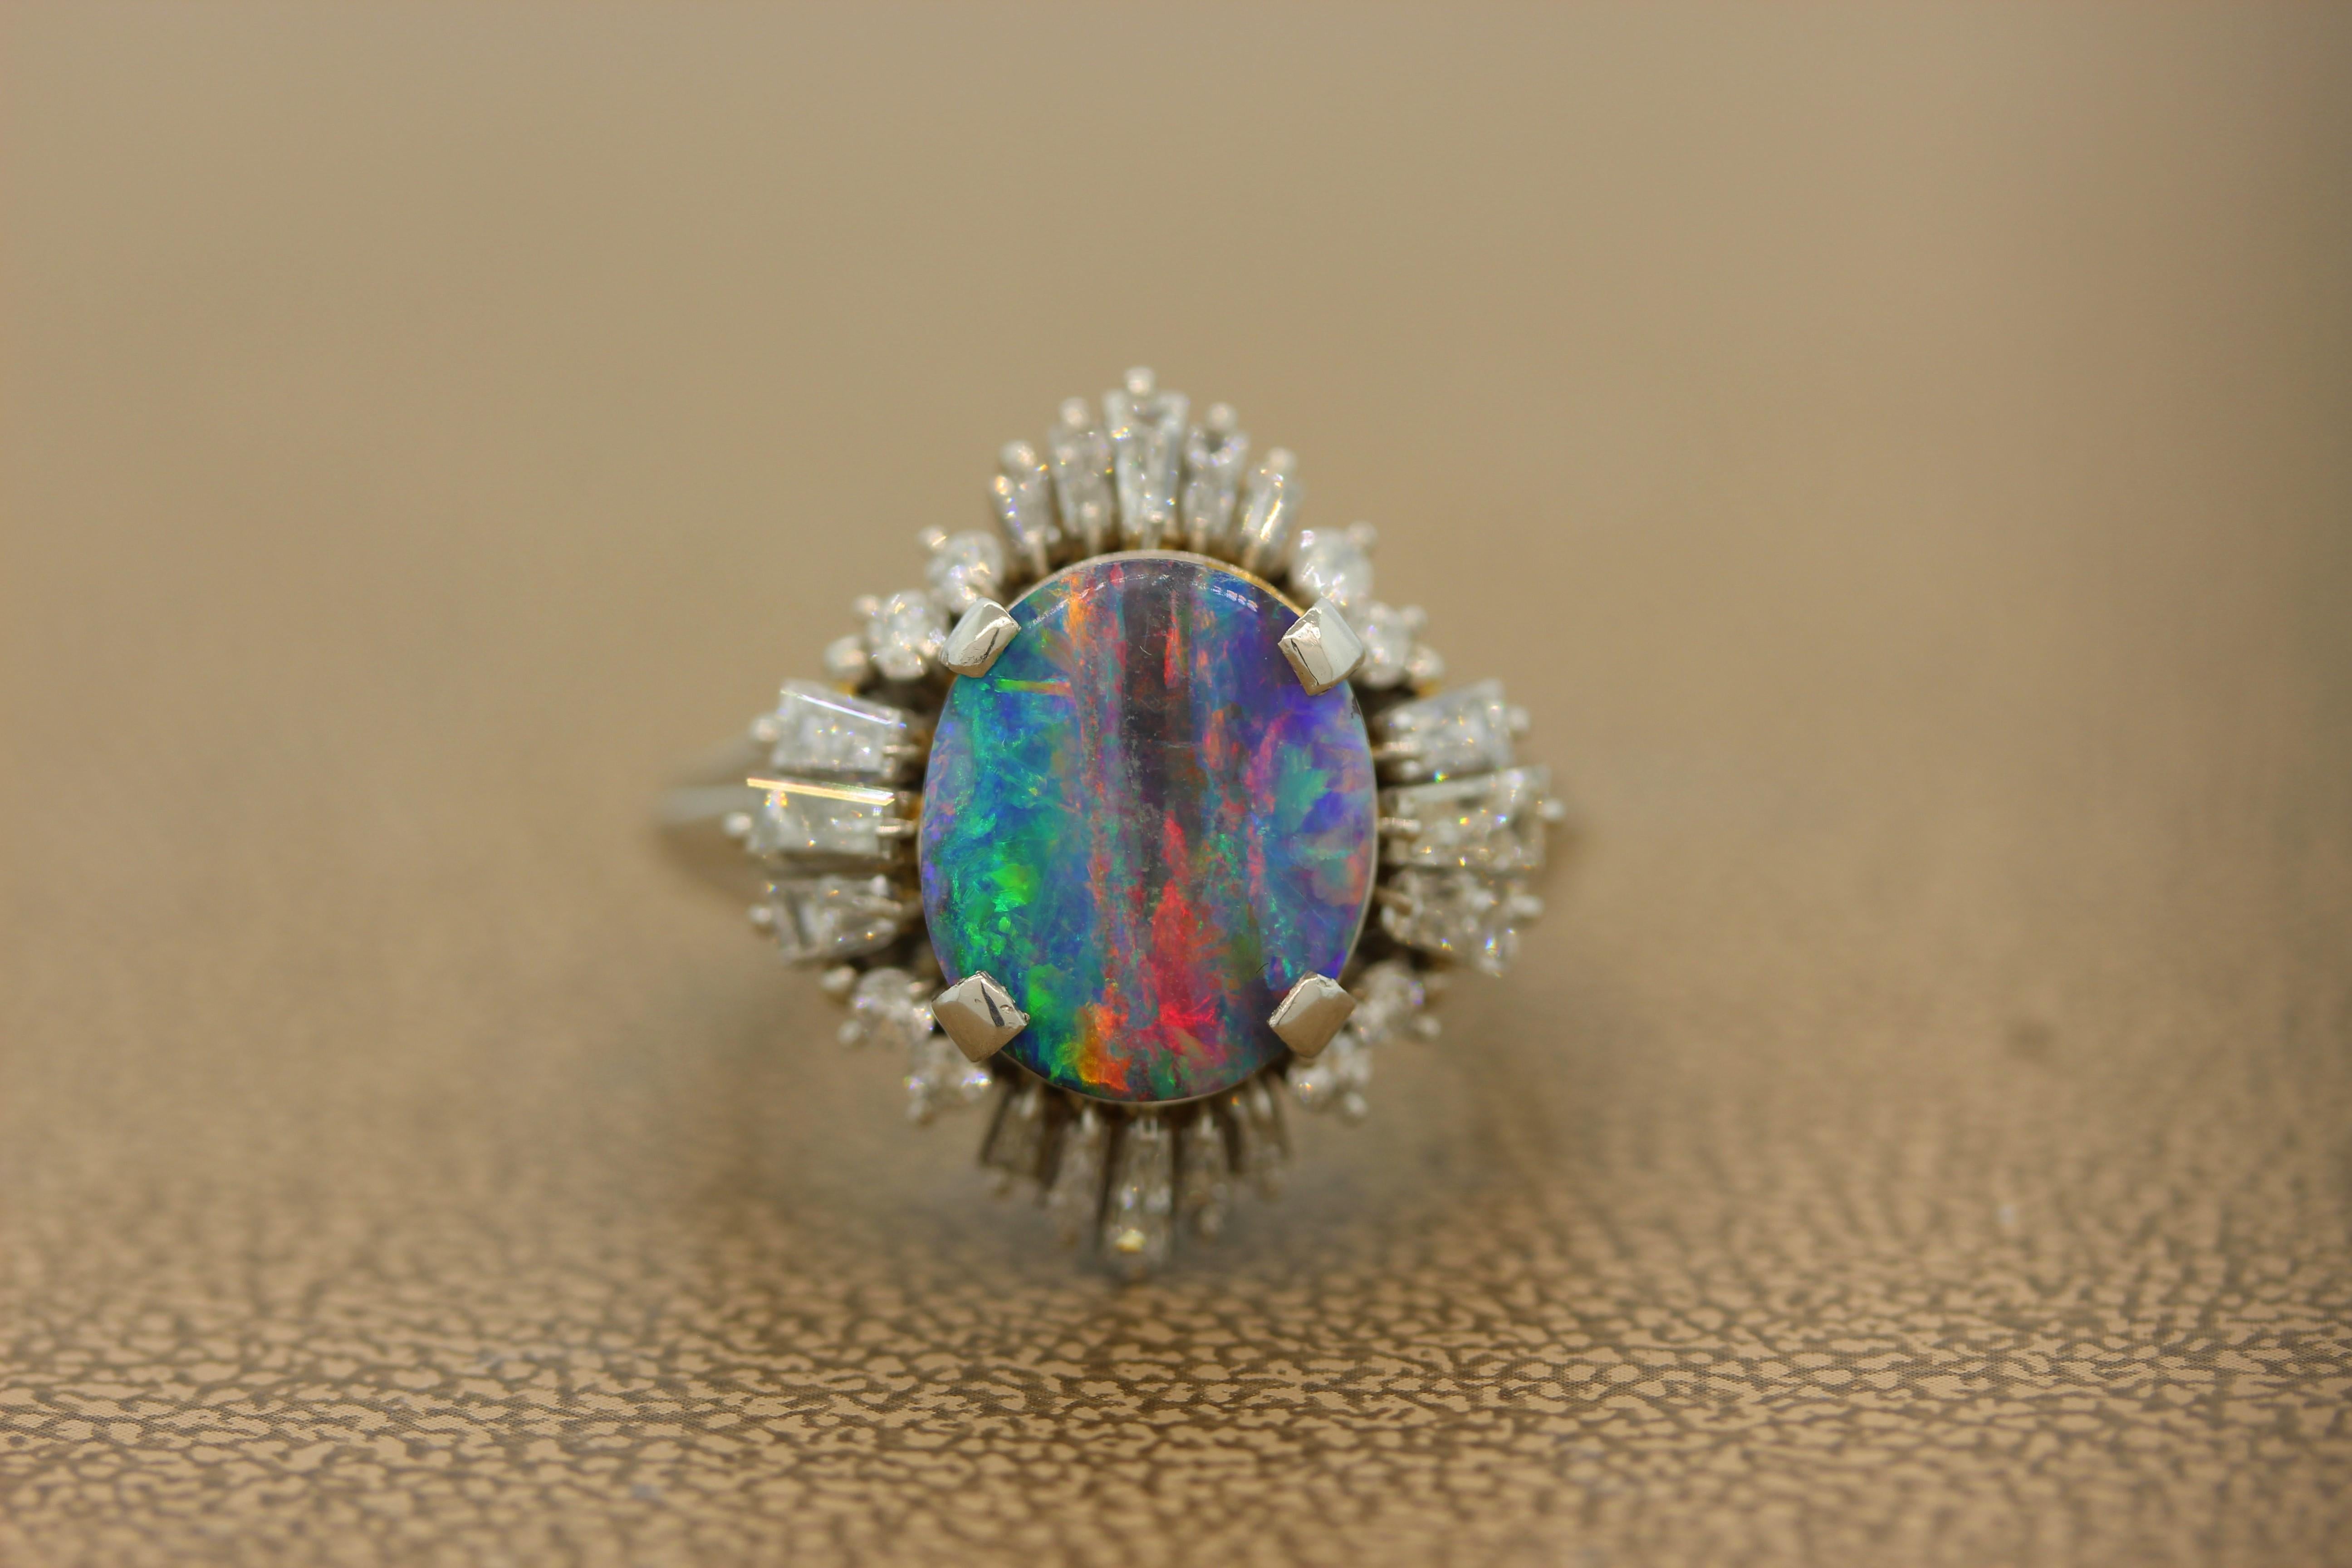 A beautiful ring featuring a gem 4.73 carat boulder opal with all the colors in the spectrum. Strong flashes of red, blue, green and purple can all be seen on this gem opal. It is haloed by 1.05 carats of baguette and round cut diamonds in a